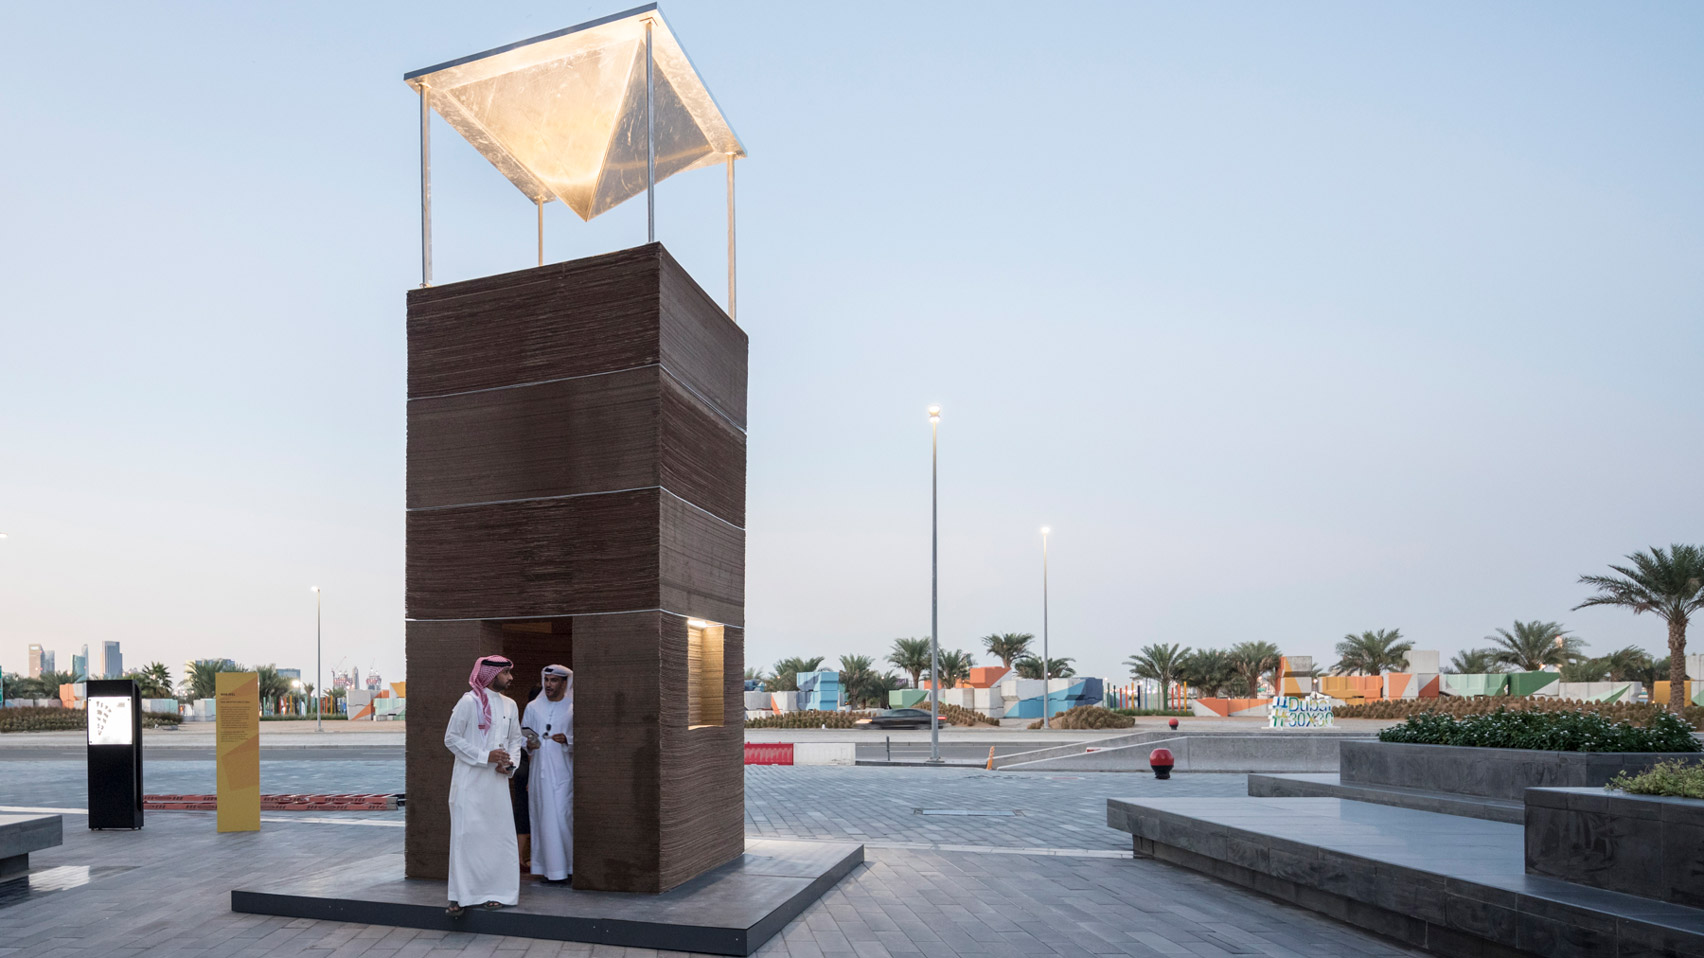 MAS Architecture Studio's wind tower keeps visitors cool without air-conditioning - This is what we are reading for you.